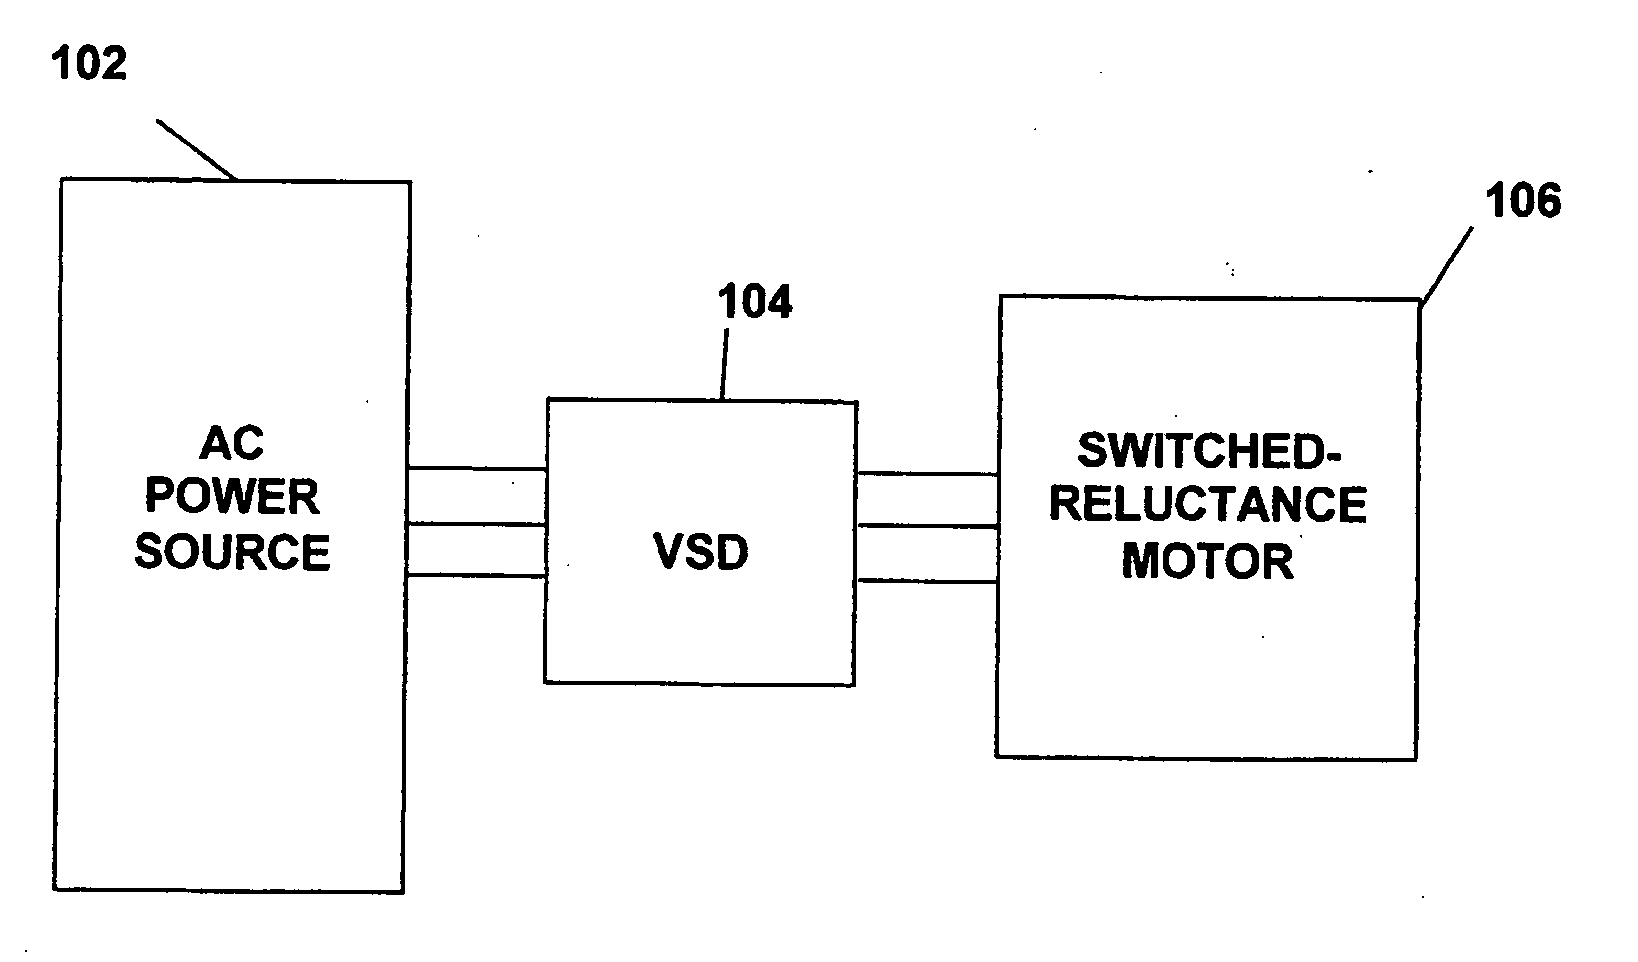 Application of a switched reluctance motion control system in a chiller system